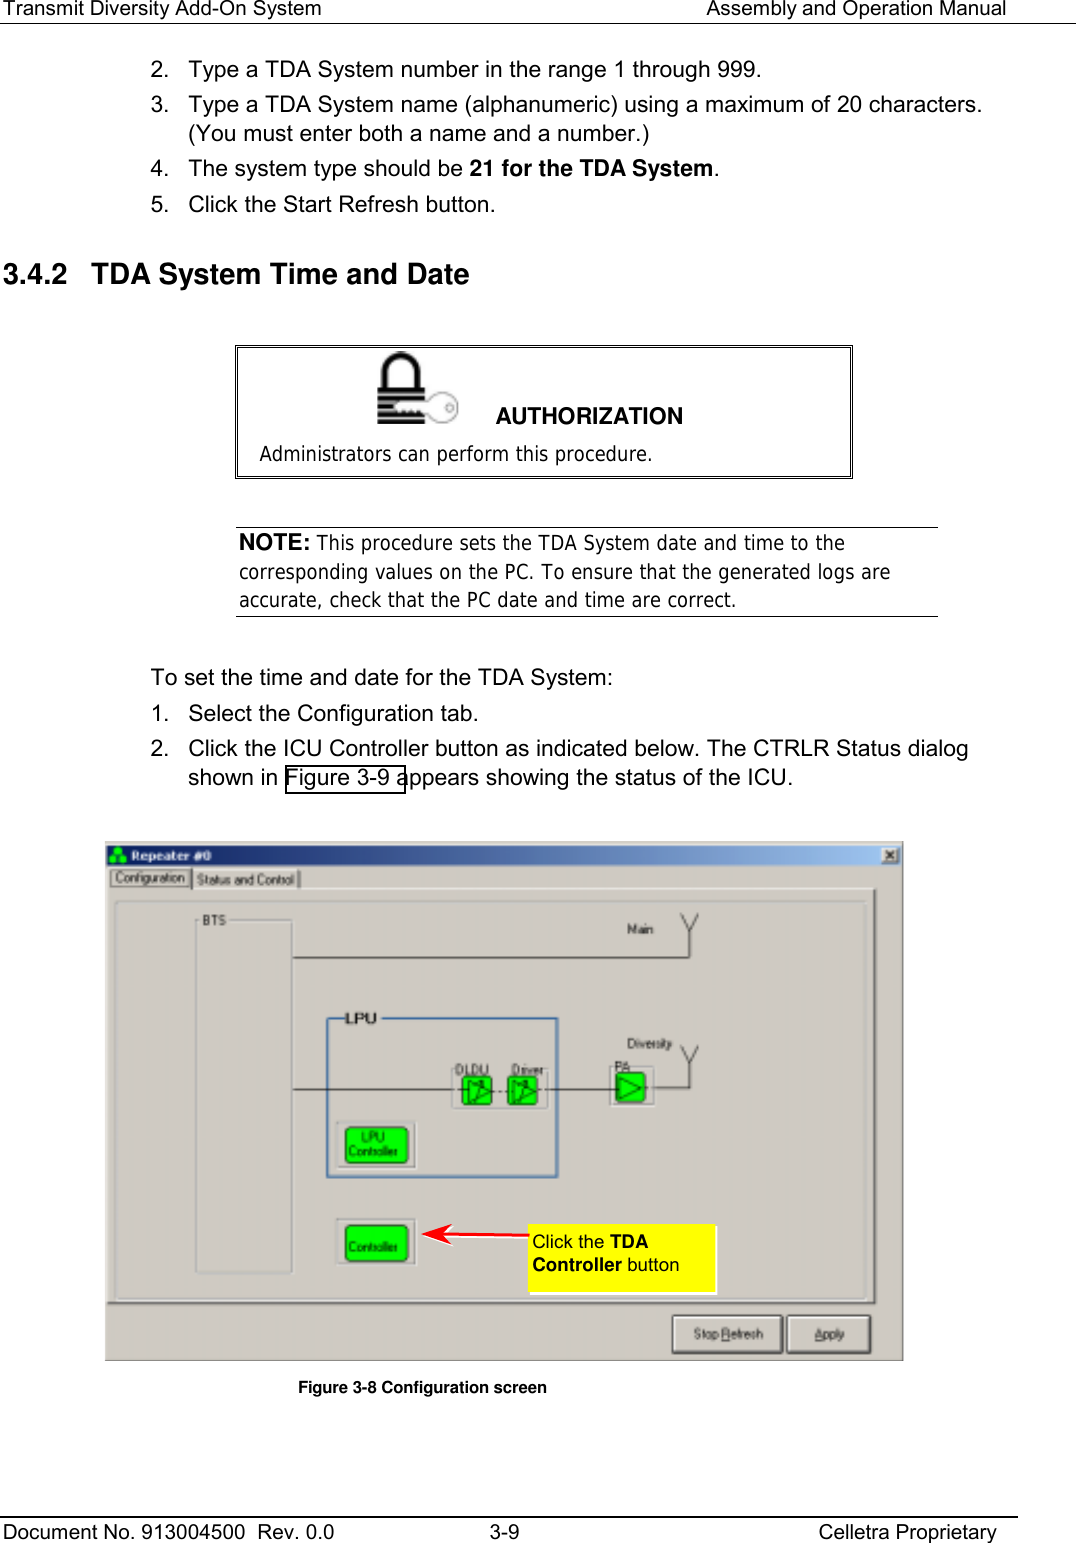 Transmit Diversity Add-On System   Assembly and Operation Manual  Document No. 913004500  Rev. 0.0  3-9  Celletra Proprietary  2.  Type a TDA System number in the range 1 through 999.  3.  Type a TDA System name (alphanumeric) using a maximum of 20 characters. (You must enter both a name and a number.) 4.  The system type should be 21 for the TDA System. 5.  Click the Start Refresh button. 3.4.2  TDA System Time and Date   AUTHORIZATION Administrators can perform this procedure.  NOTE: This procedure sets the TDA System date and time to the corresponding values on the PC. To ensure that the generated logs are accurate, check that the PC date and time are correct.  To set the time and date for the TDA System: 1.  Select the Configuration tab.  2.  Click the ICU Controller button as indicated below. The CTRLR Status dialog shown in Figure  3-9 appears showing the status of the ICU.   Figure  3-8 Configuration screen  Click the TDA Controller button 